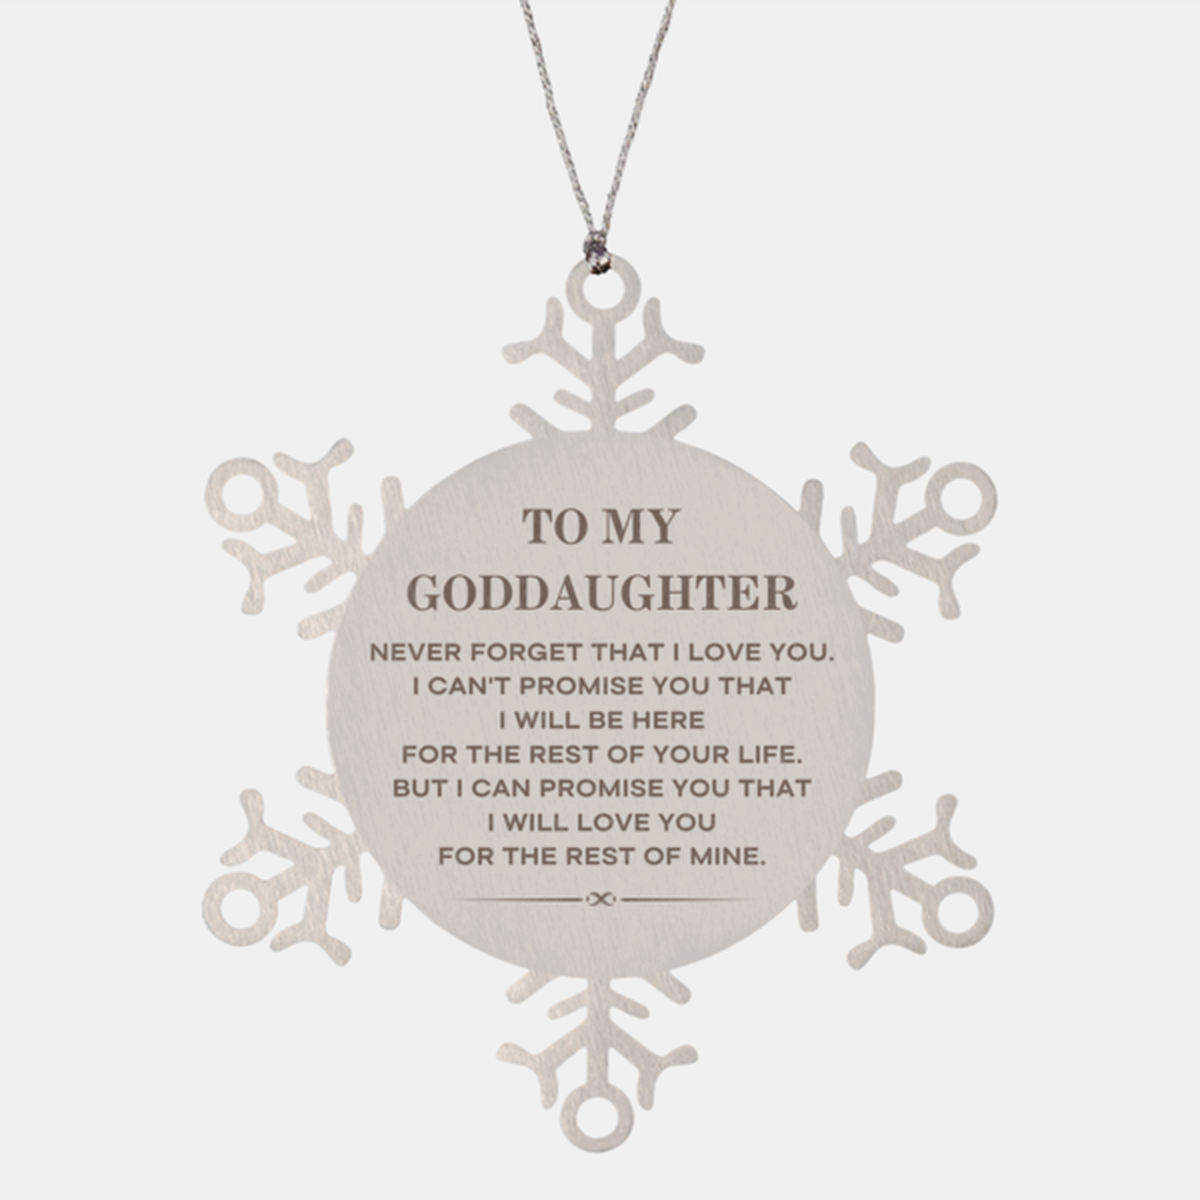 To My Goddaughter Gifts, I will love you for the rest of mine, Love Goddaughter Ornament, Birthday Christmas Unique Snowflake Ornament For Goddaughter